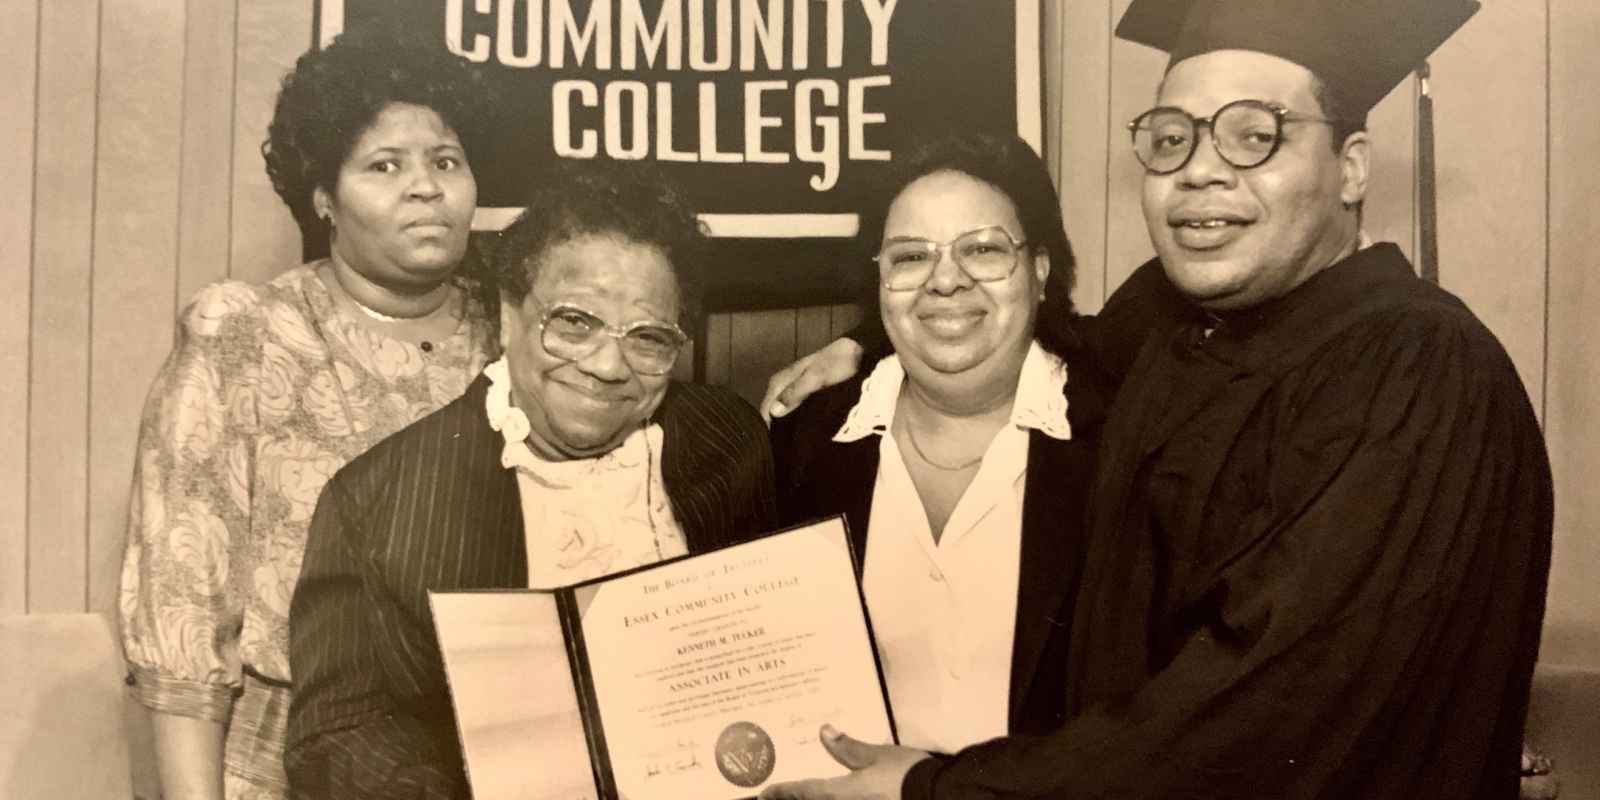 Kenneth Tucker receives diploma from Essex Community College. He is pictured with family members.